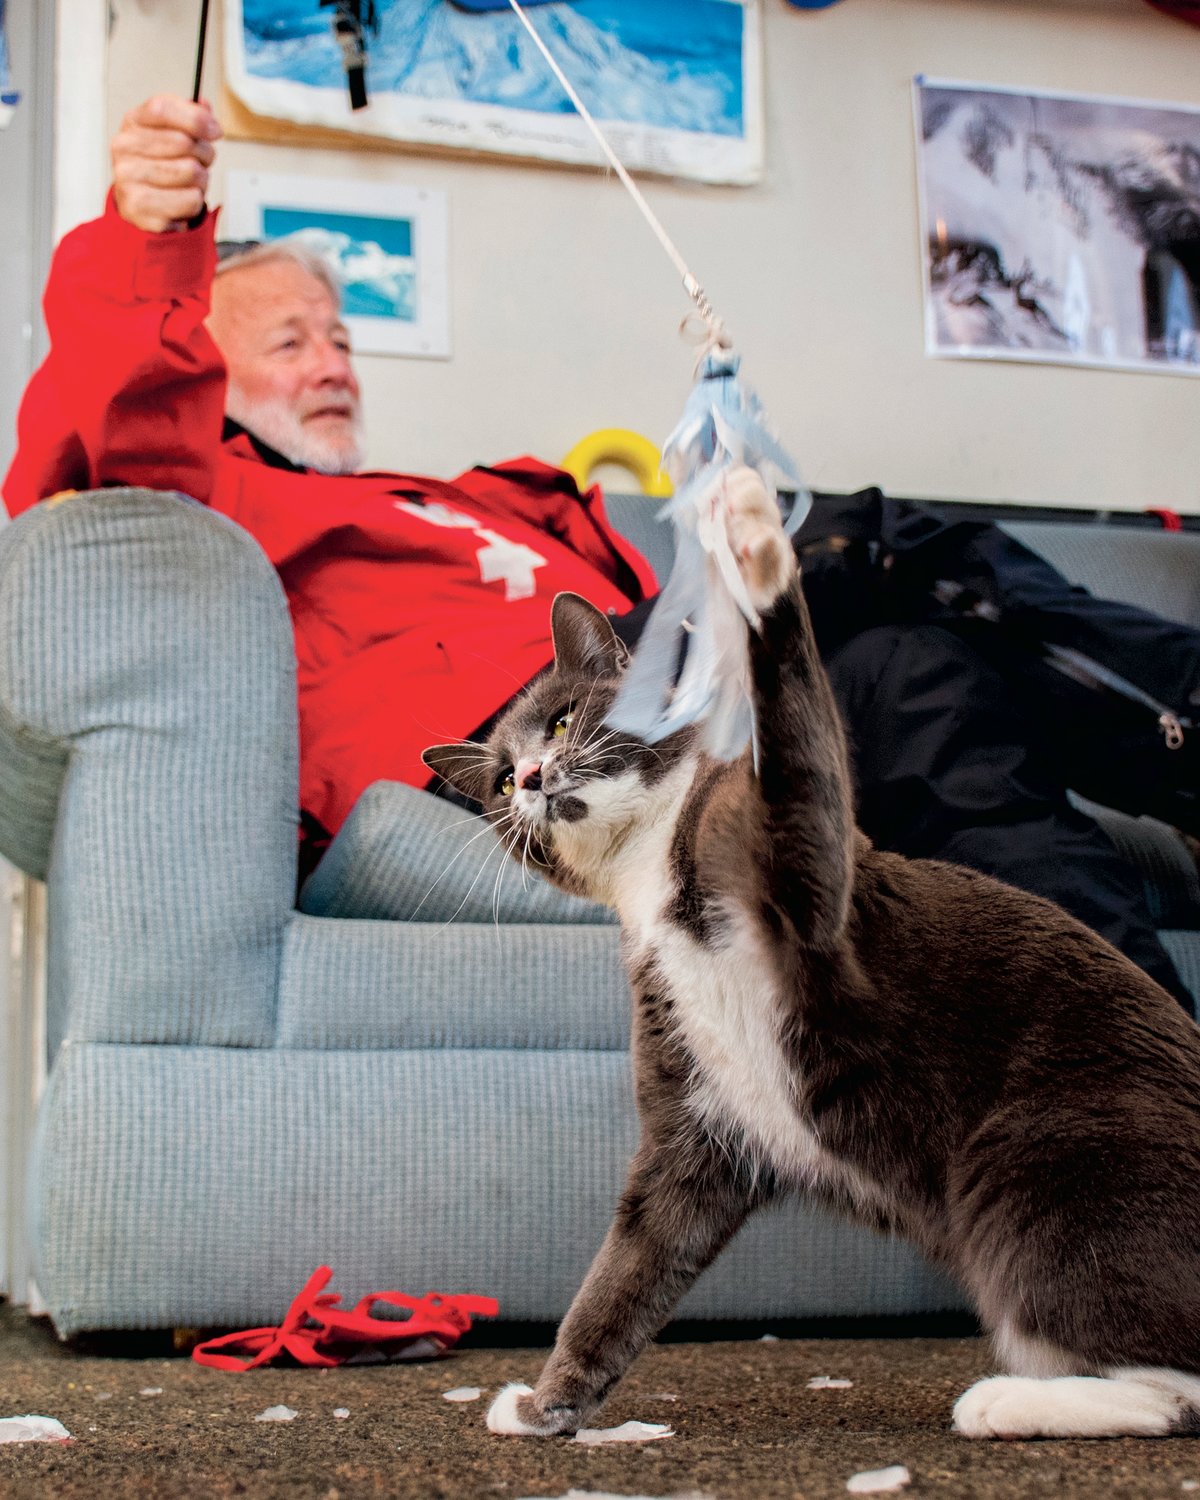 Michael “Murph” Murphy talks about his time with Ski Patrol at White Pass while holding a cat toy that Uzi swats inside patrol dispatch at the top of the Great White Express chairlift on Sunday.